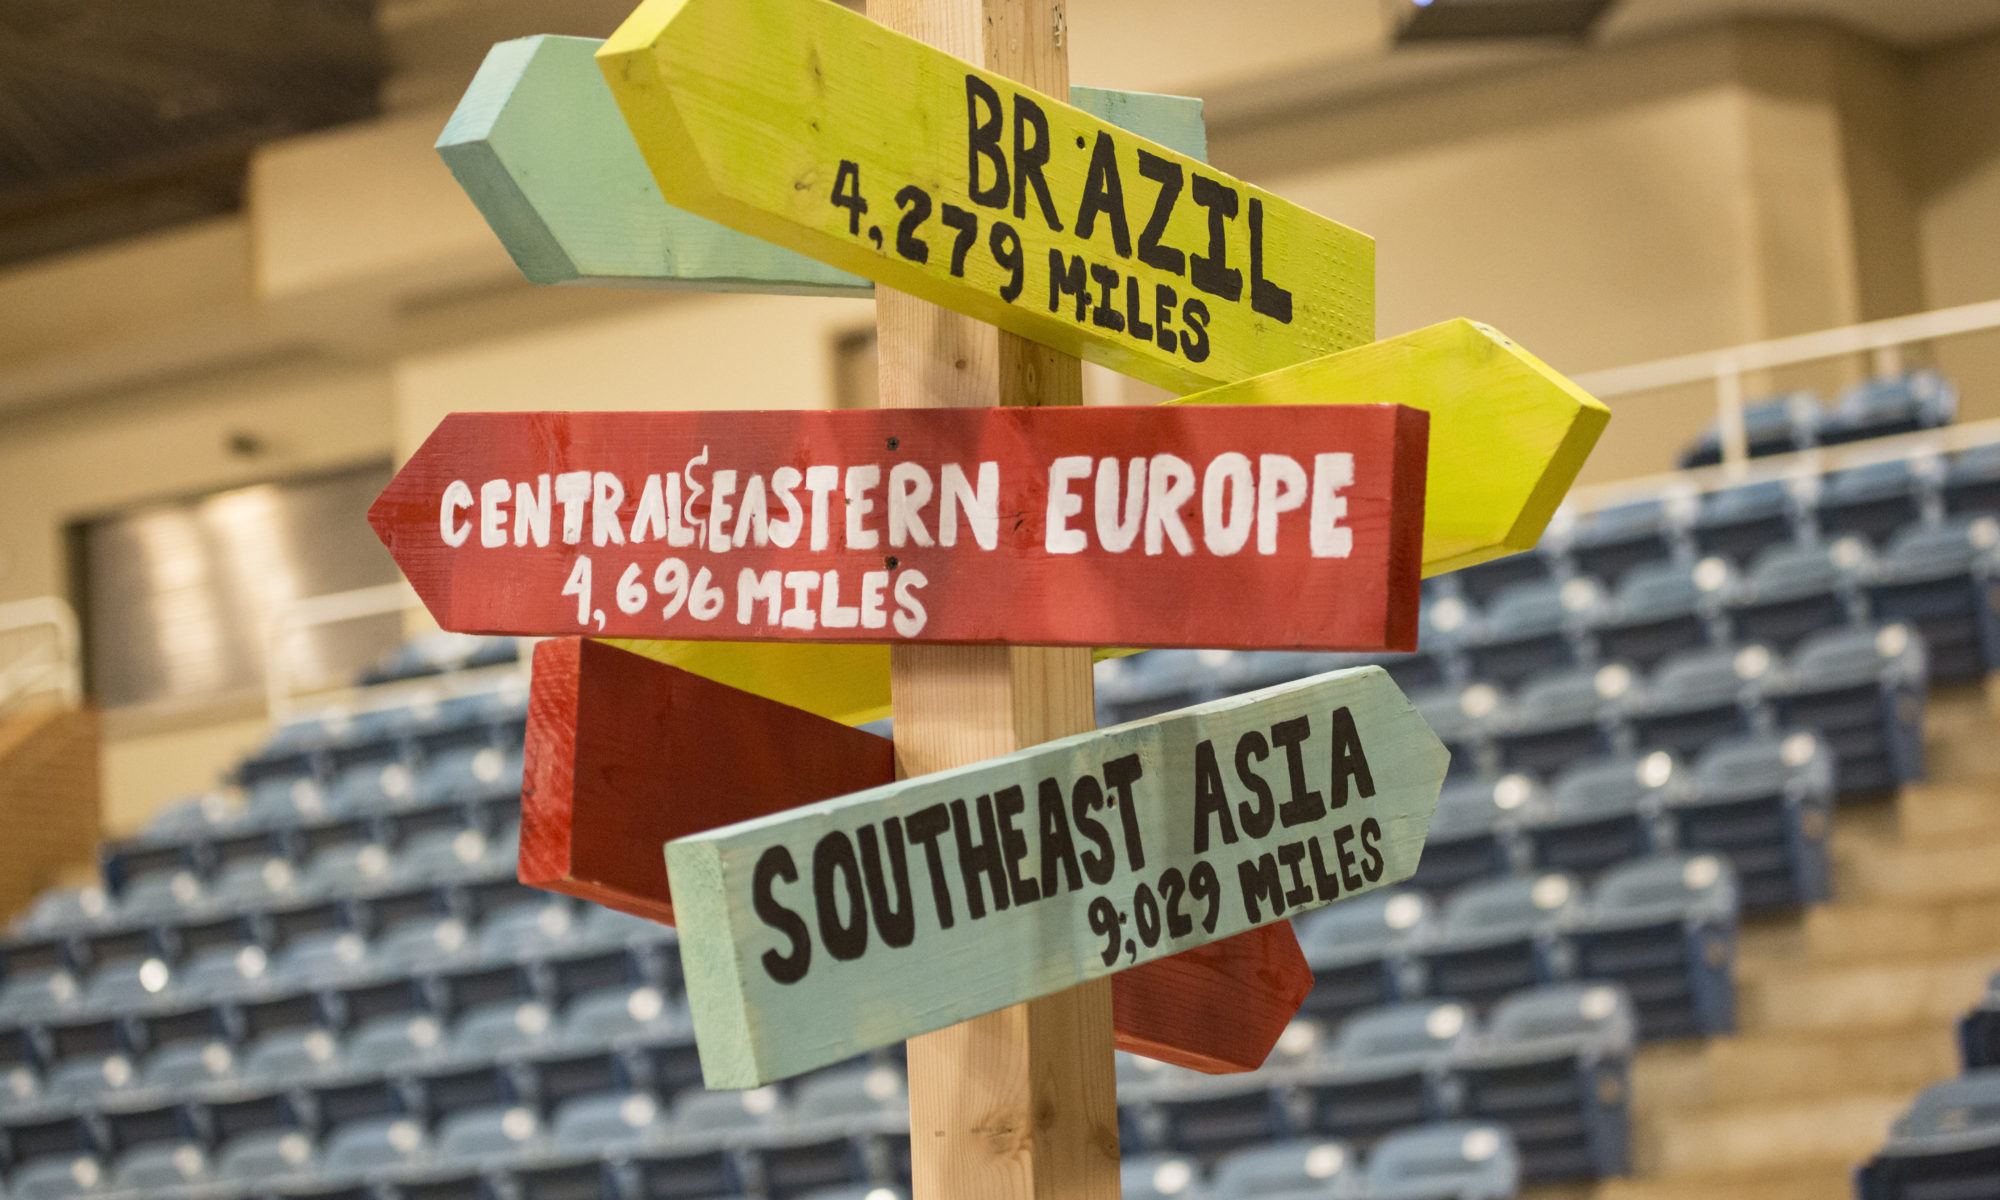 Sign pointing to different countries and regions around the world.